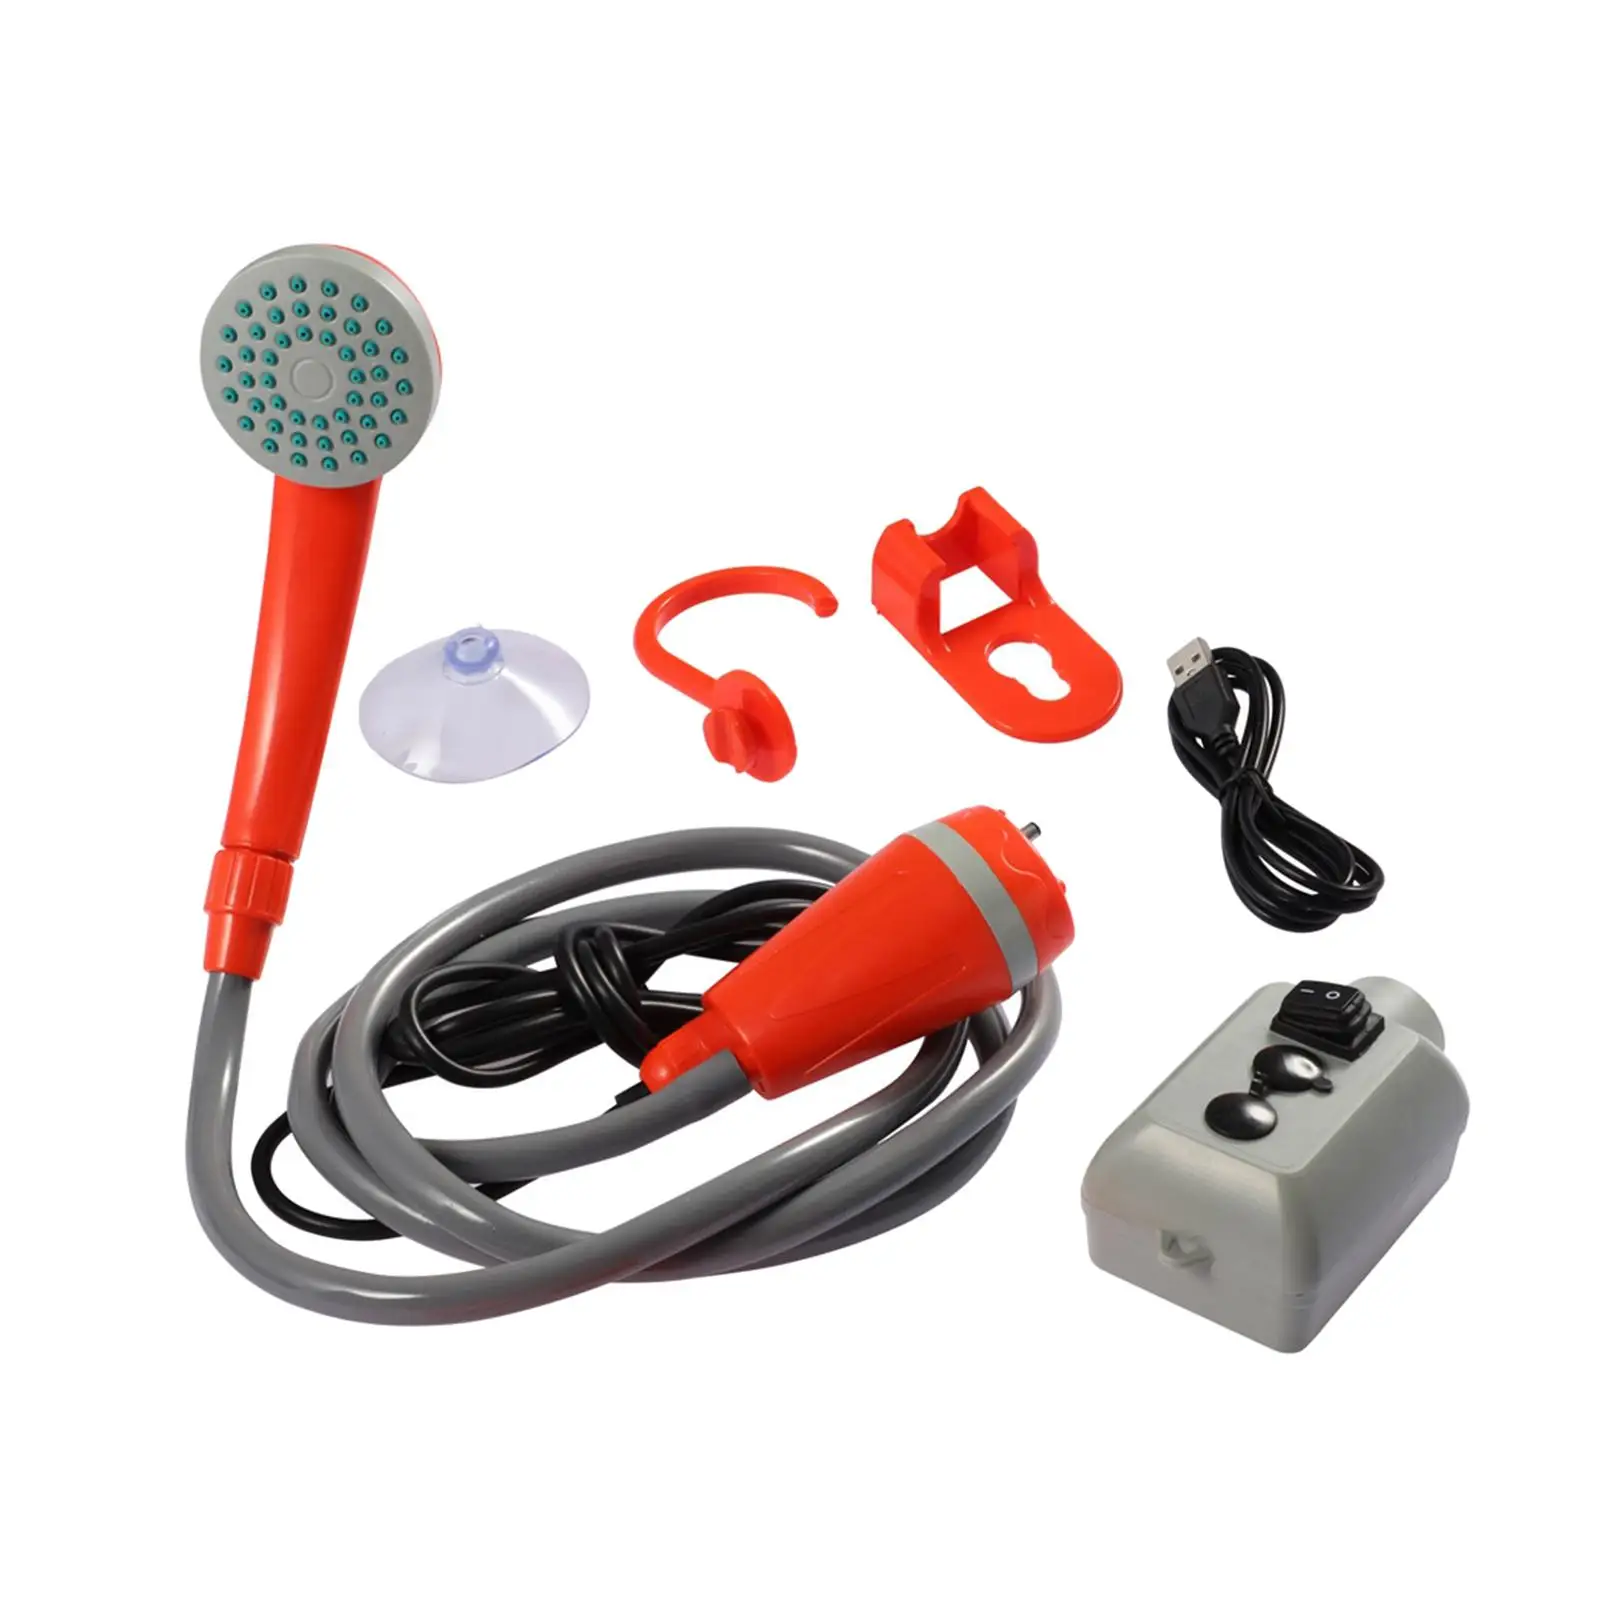 Portable Camping Shower Handheld Compact Rechargeable Pressure Washer for Hiking Car Washing Garden Watering Outdoor Travel